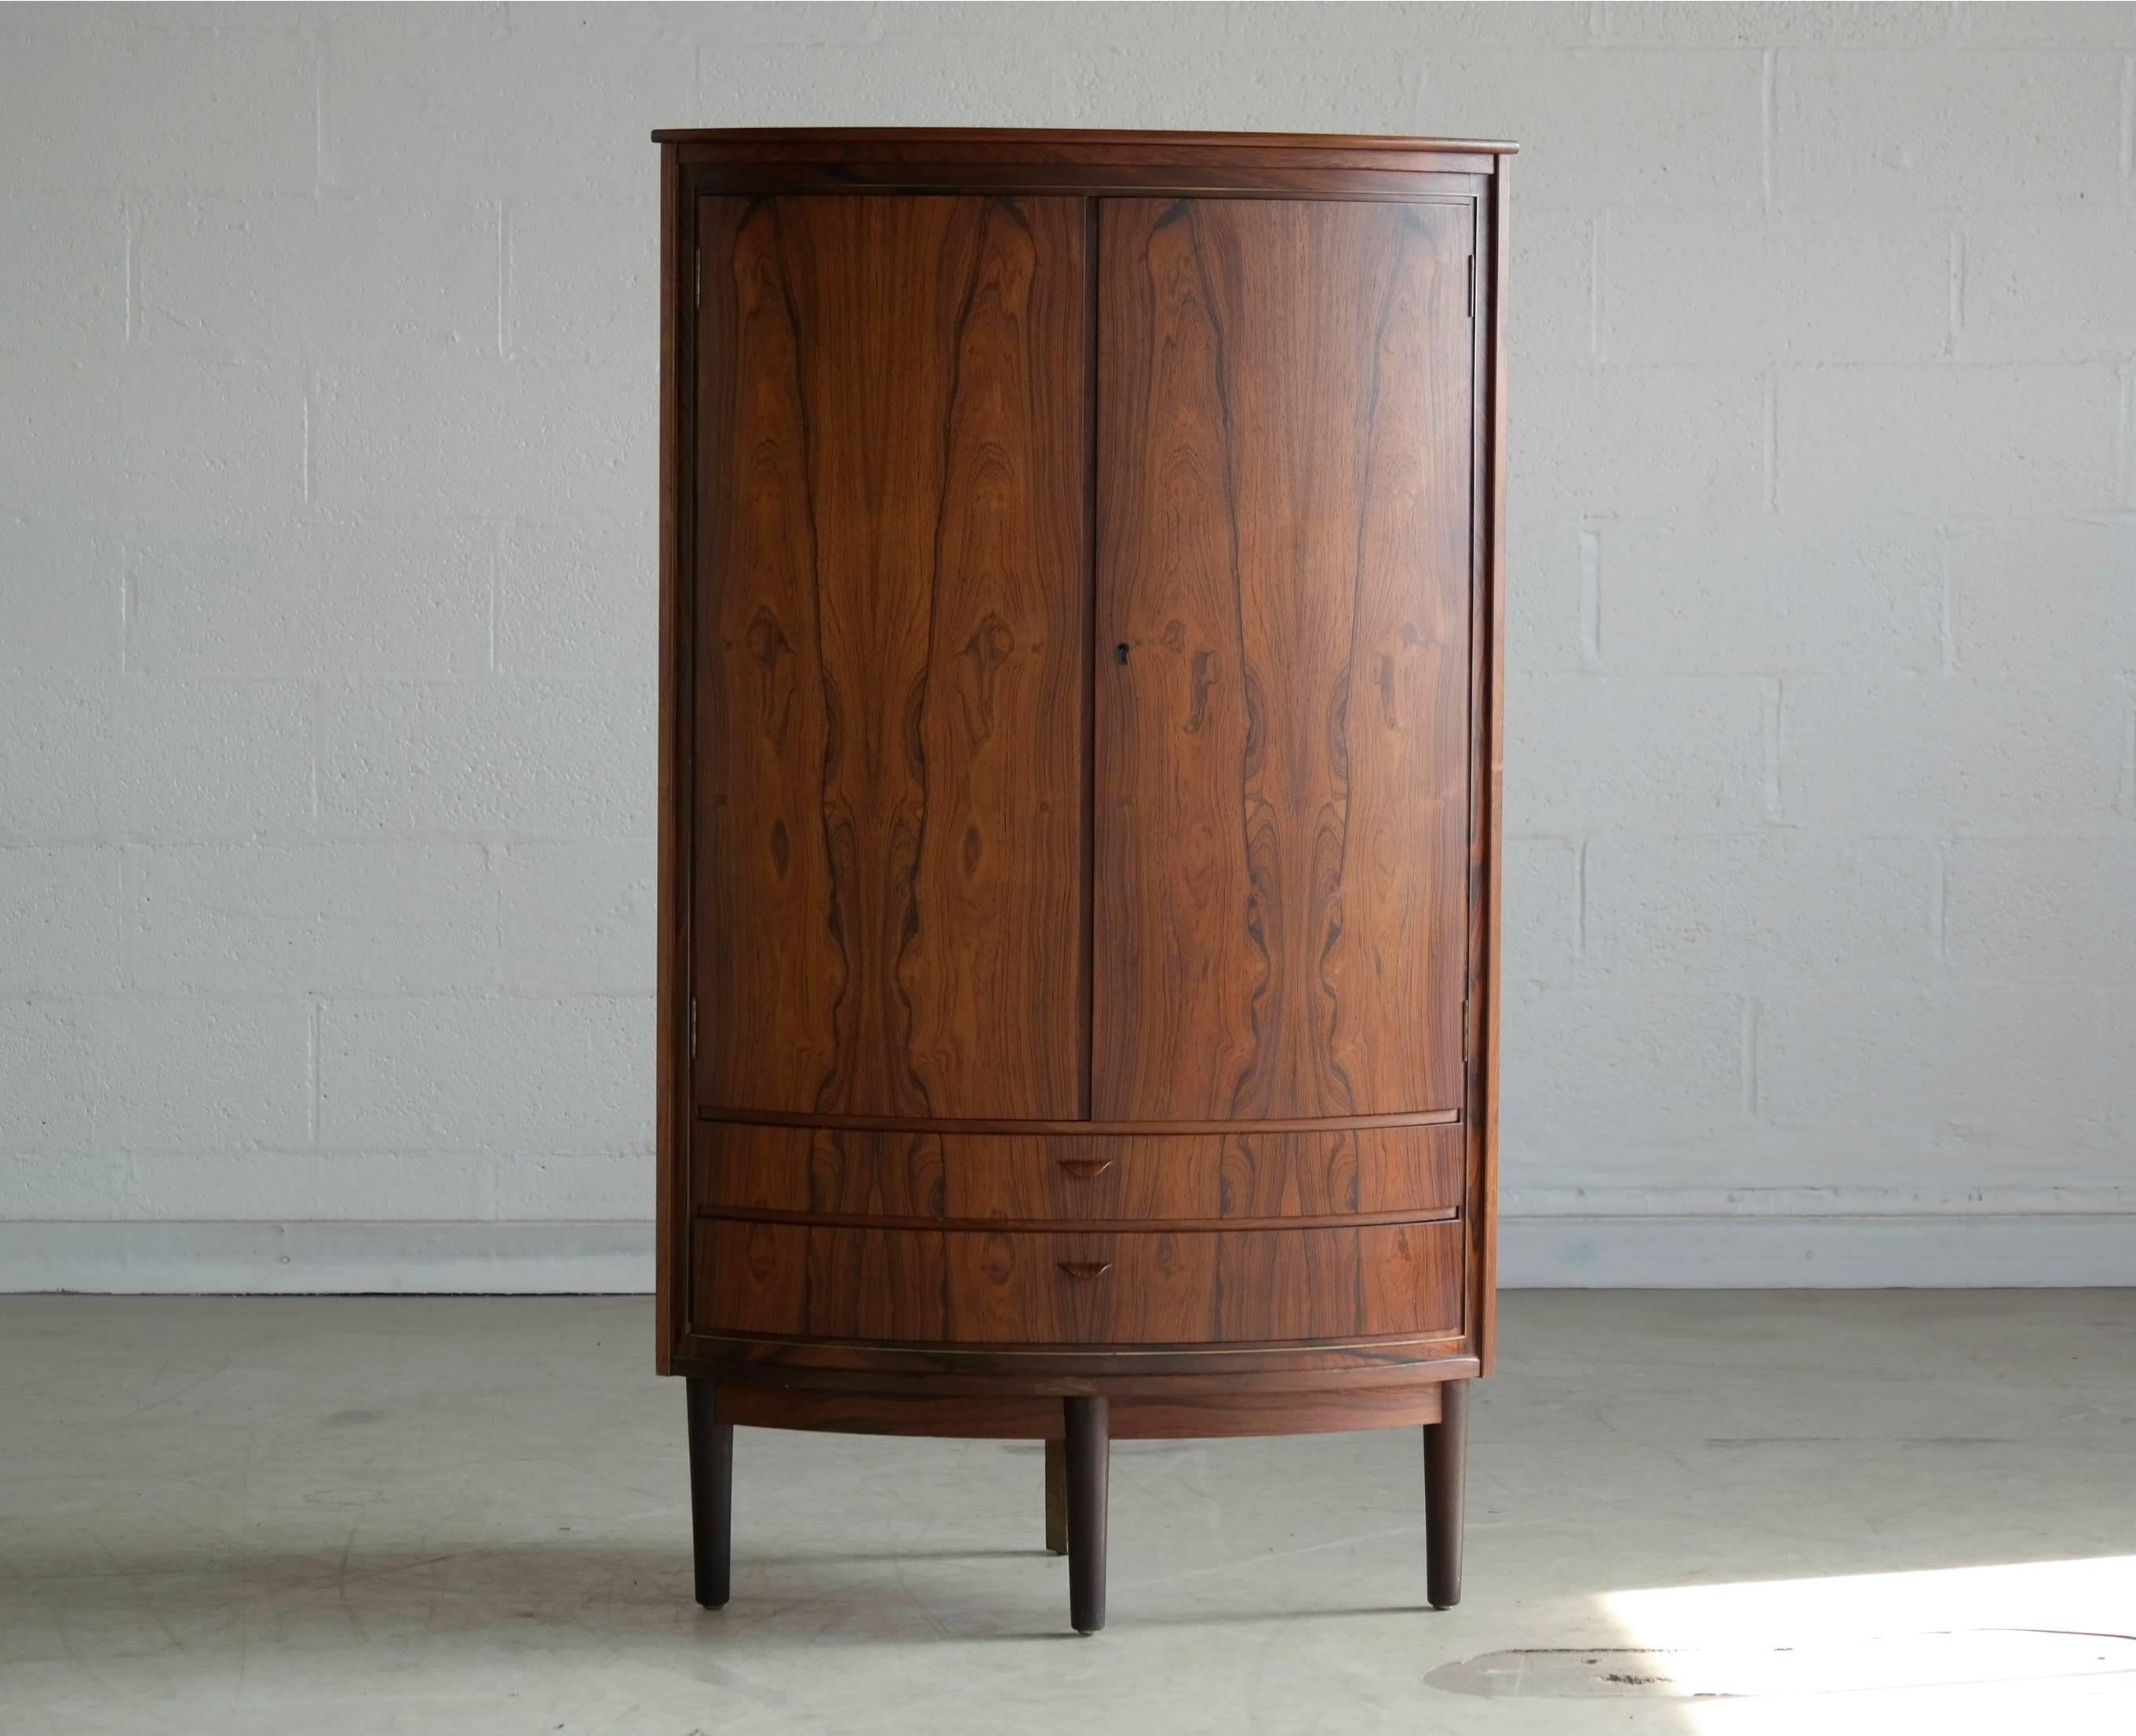 Superb Rosewood corner cabinet of superior quality and craftsmanship. Beautiful rosewood grain figure and color with solid edges and carved pulls. Excellent condition. Corner cabinets don't get better than this.